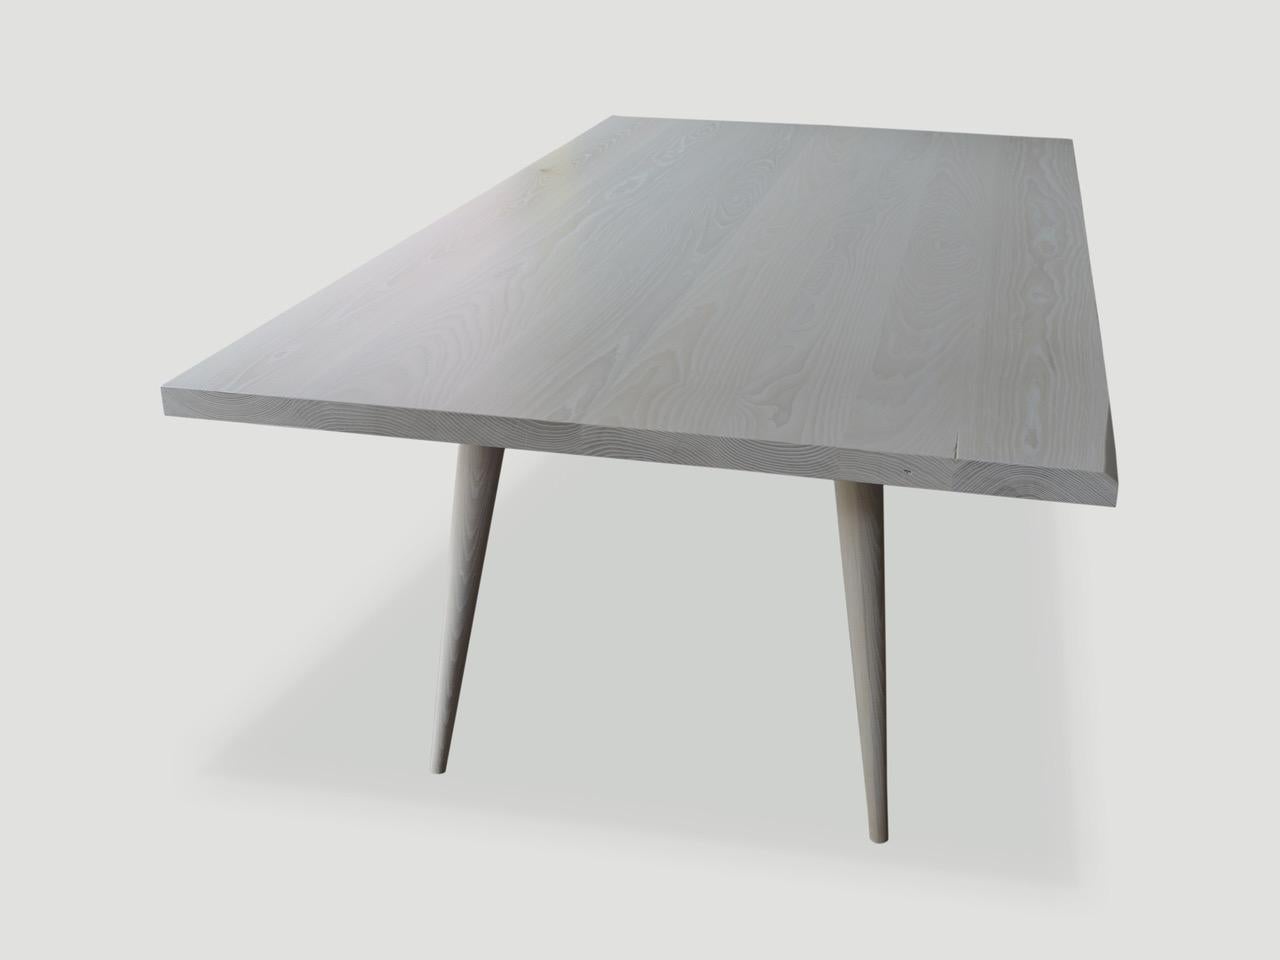 Andrianna Shamaris Bleached Ash Wood Dining Table In Excellent Condition For Sale In New York, NY